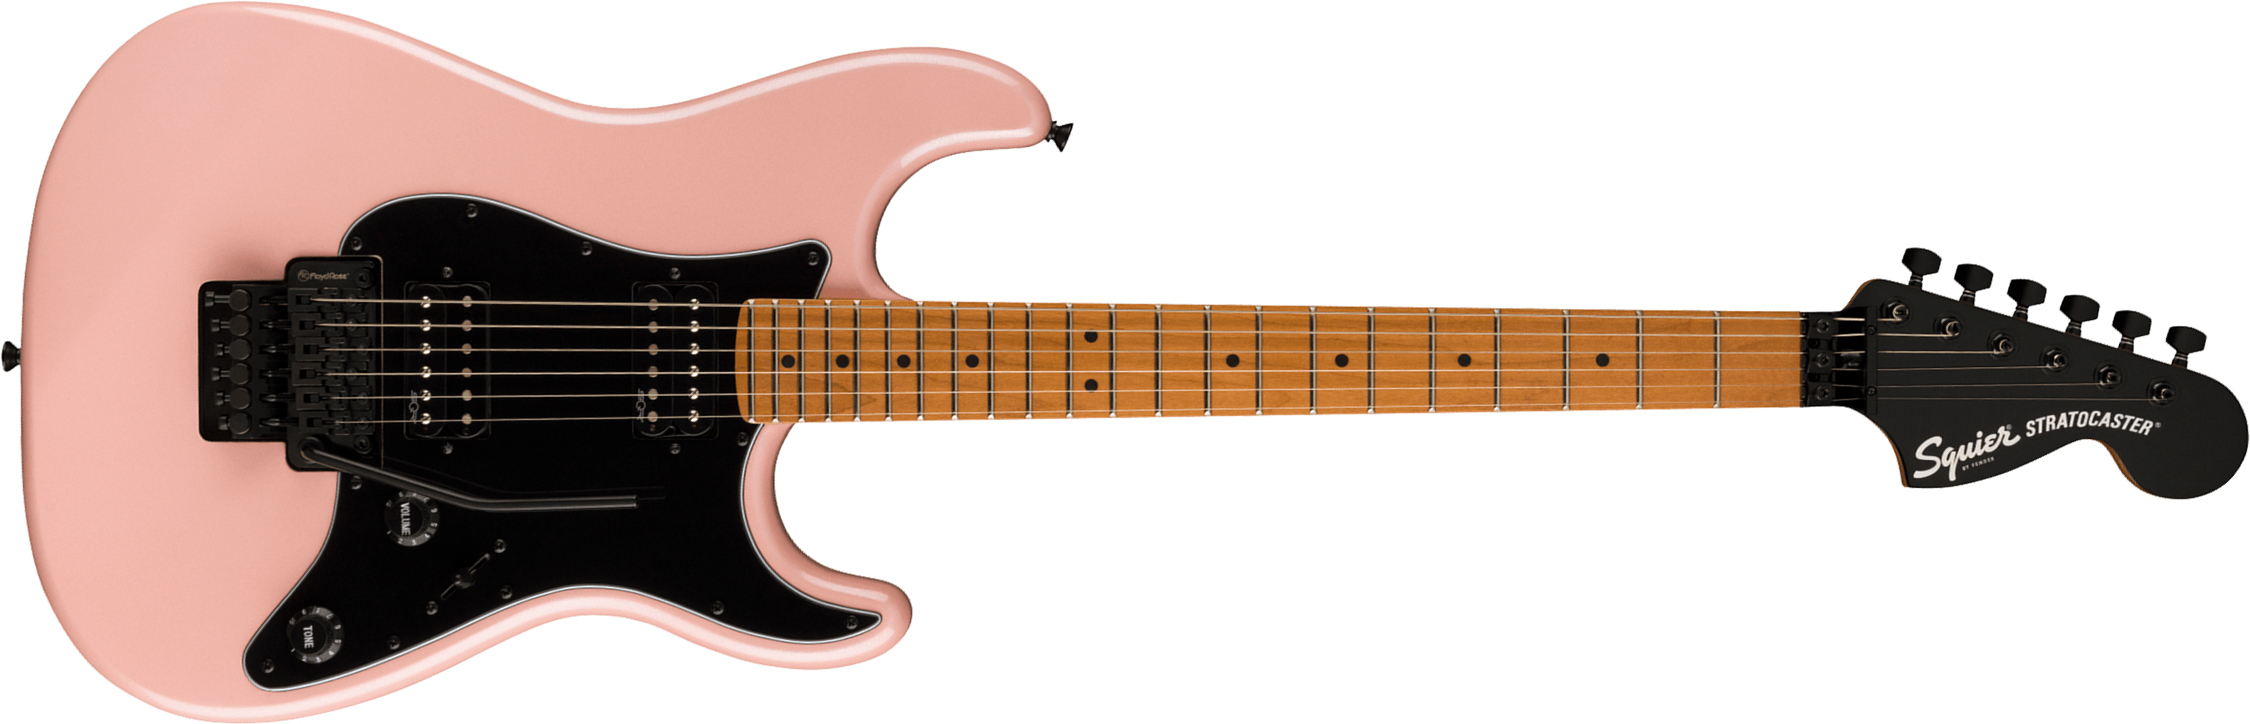 Squier Strat Contemporary Hh Fr Mn - Shell Pink Pearl - E-Gitarre in Str-Form - Main picture